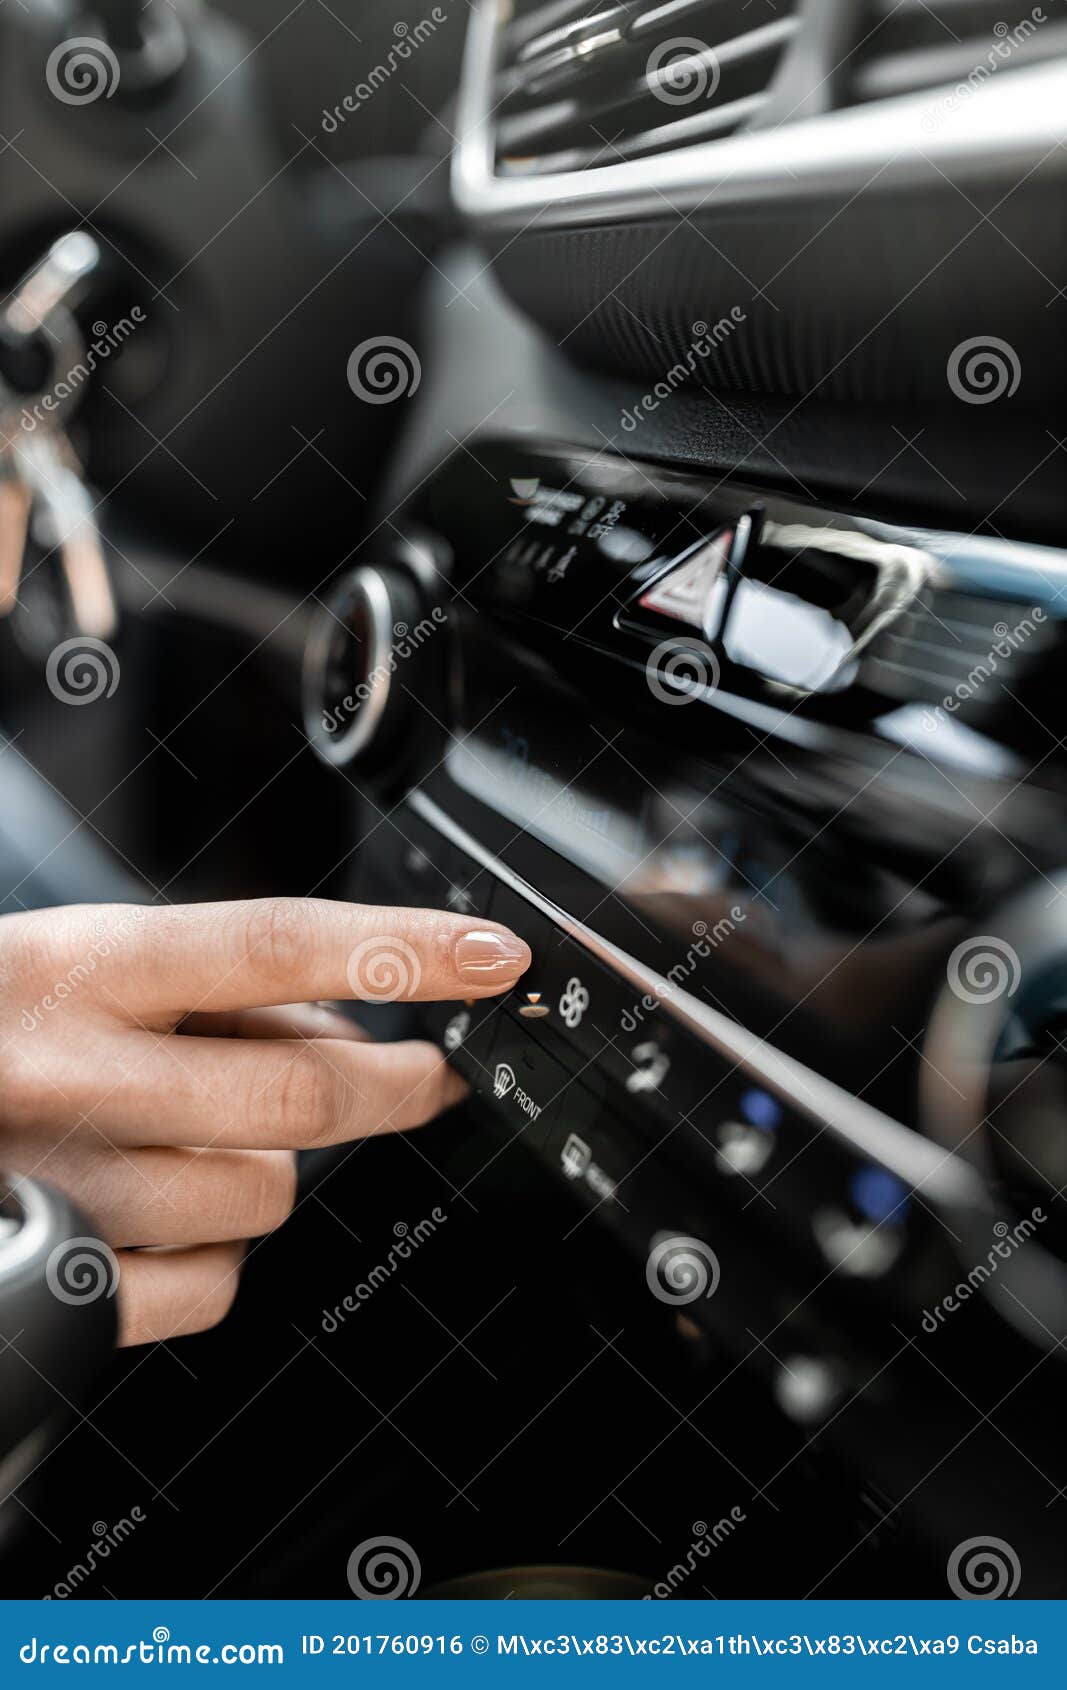 interior view of a modern new car. woman`s hand and climatronic or air conditioner system concept.